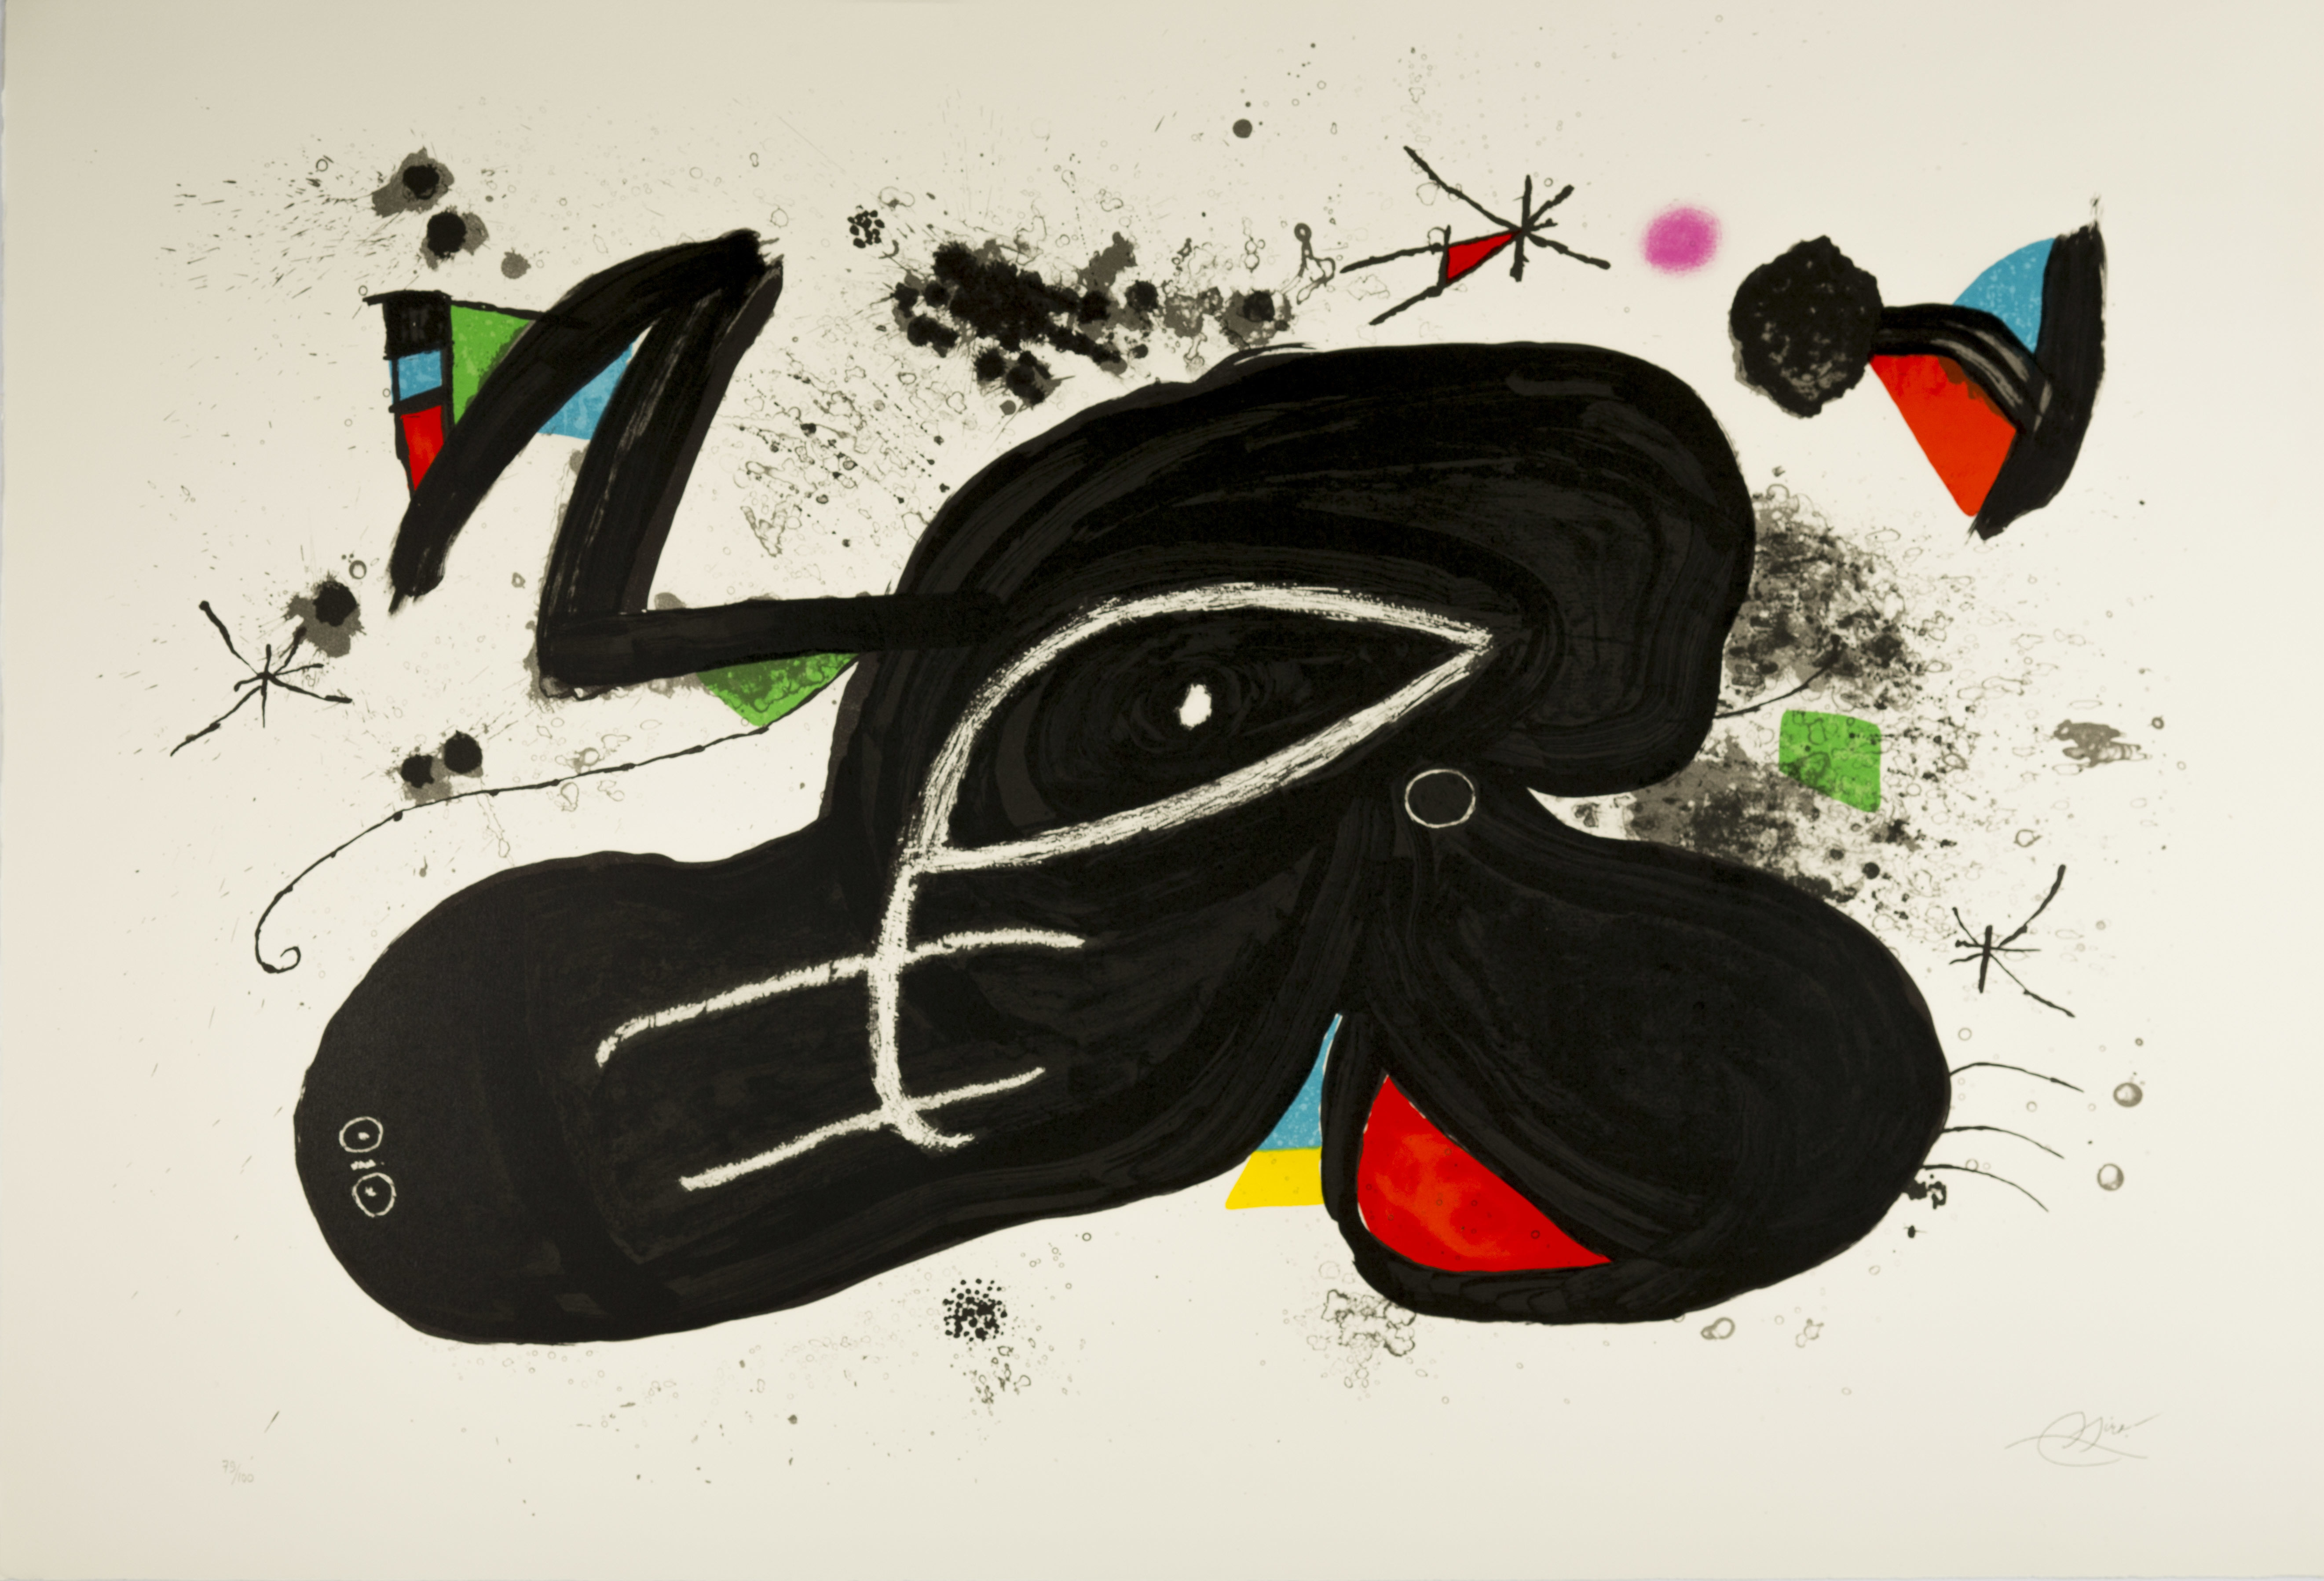 An abstract print by Joan Miro, with black red and blue shapes.